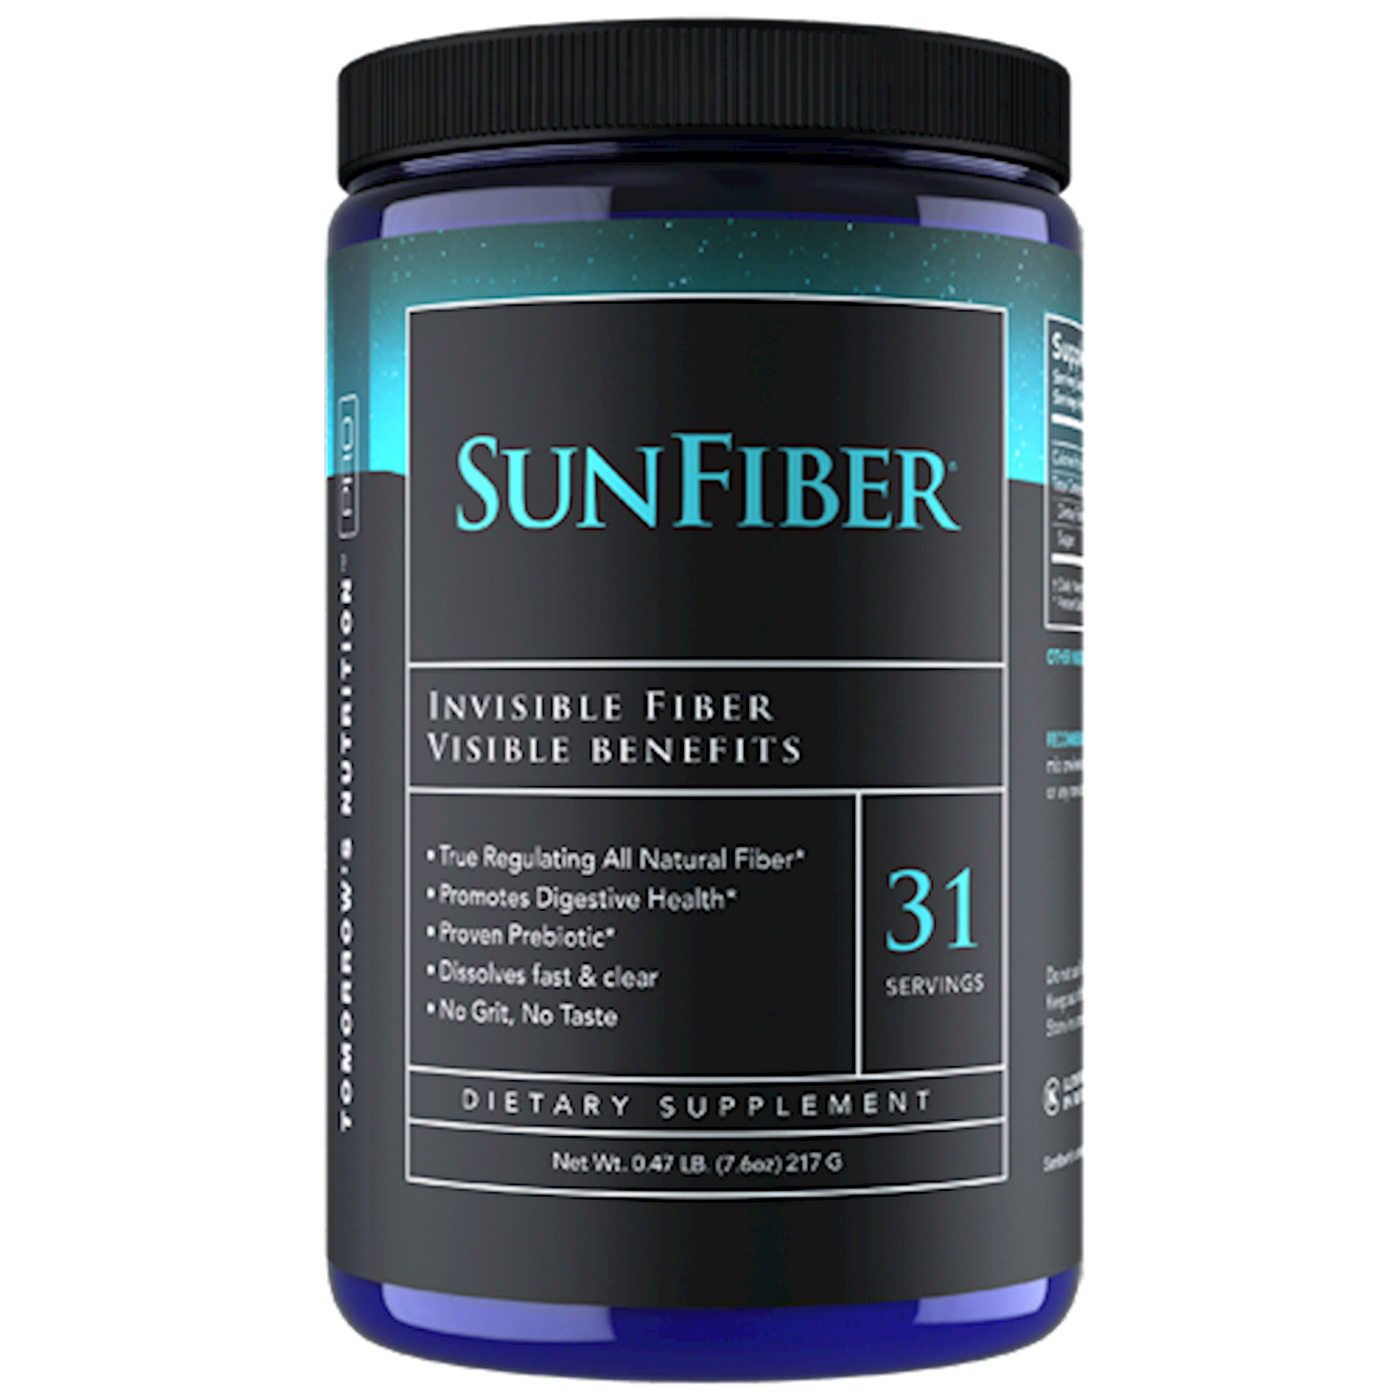 SunFiber ings Curated Wellness